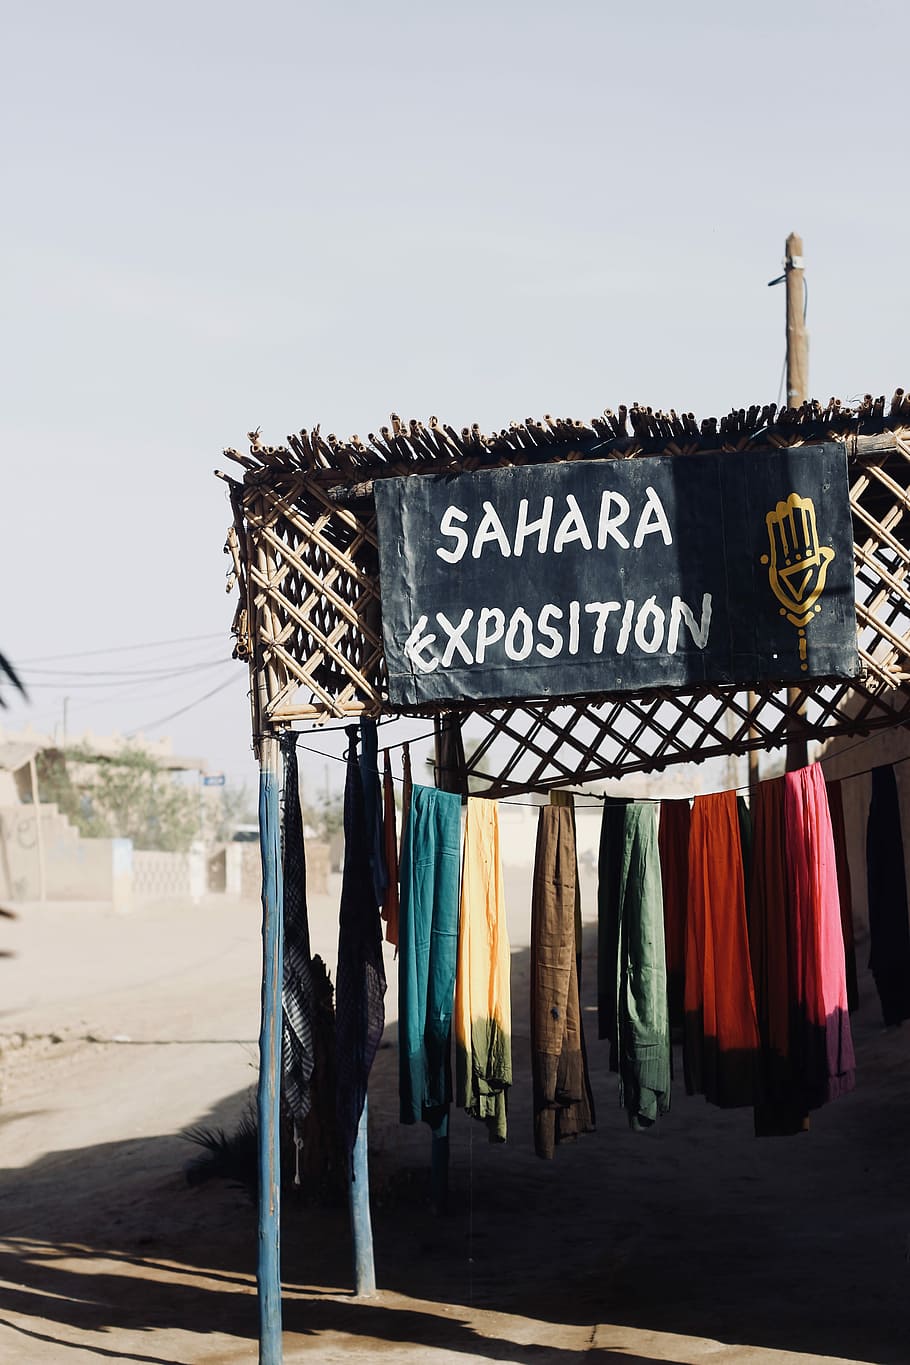 sahara exposition signage near assorted-color apparel on clothesline during daytime, assorted-color textiles hanging on clothesline, HD wallpaper